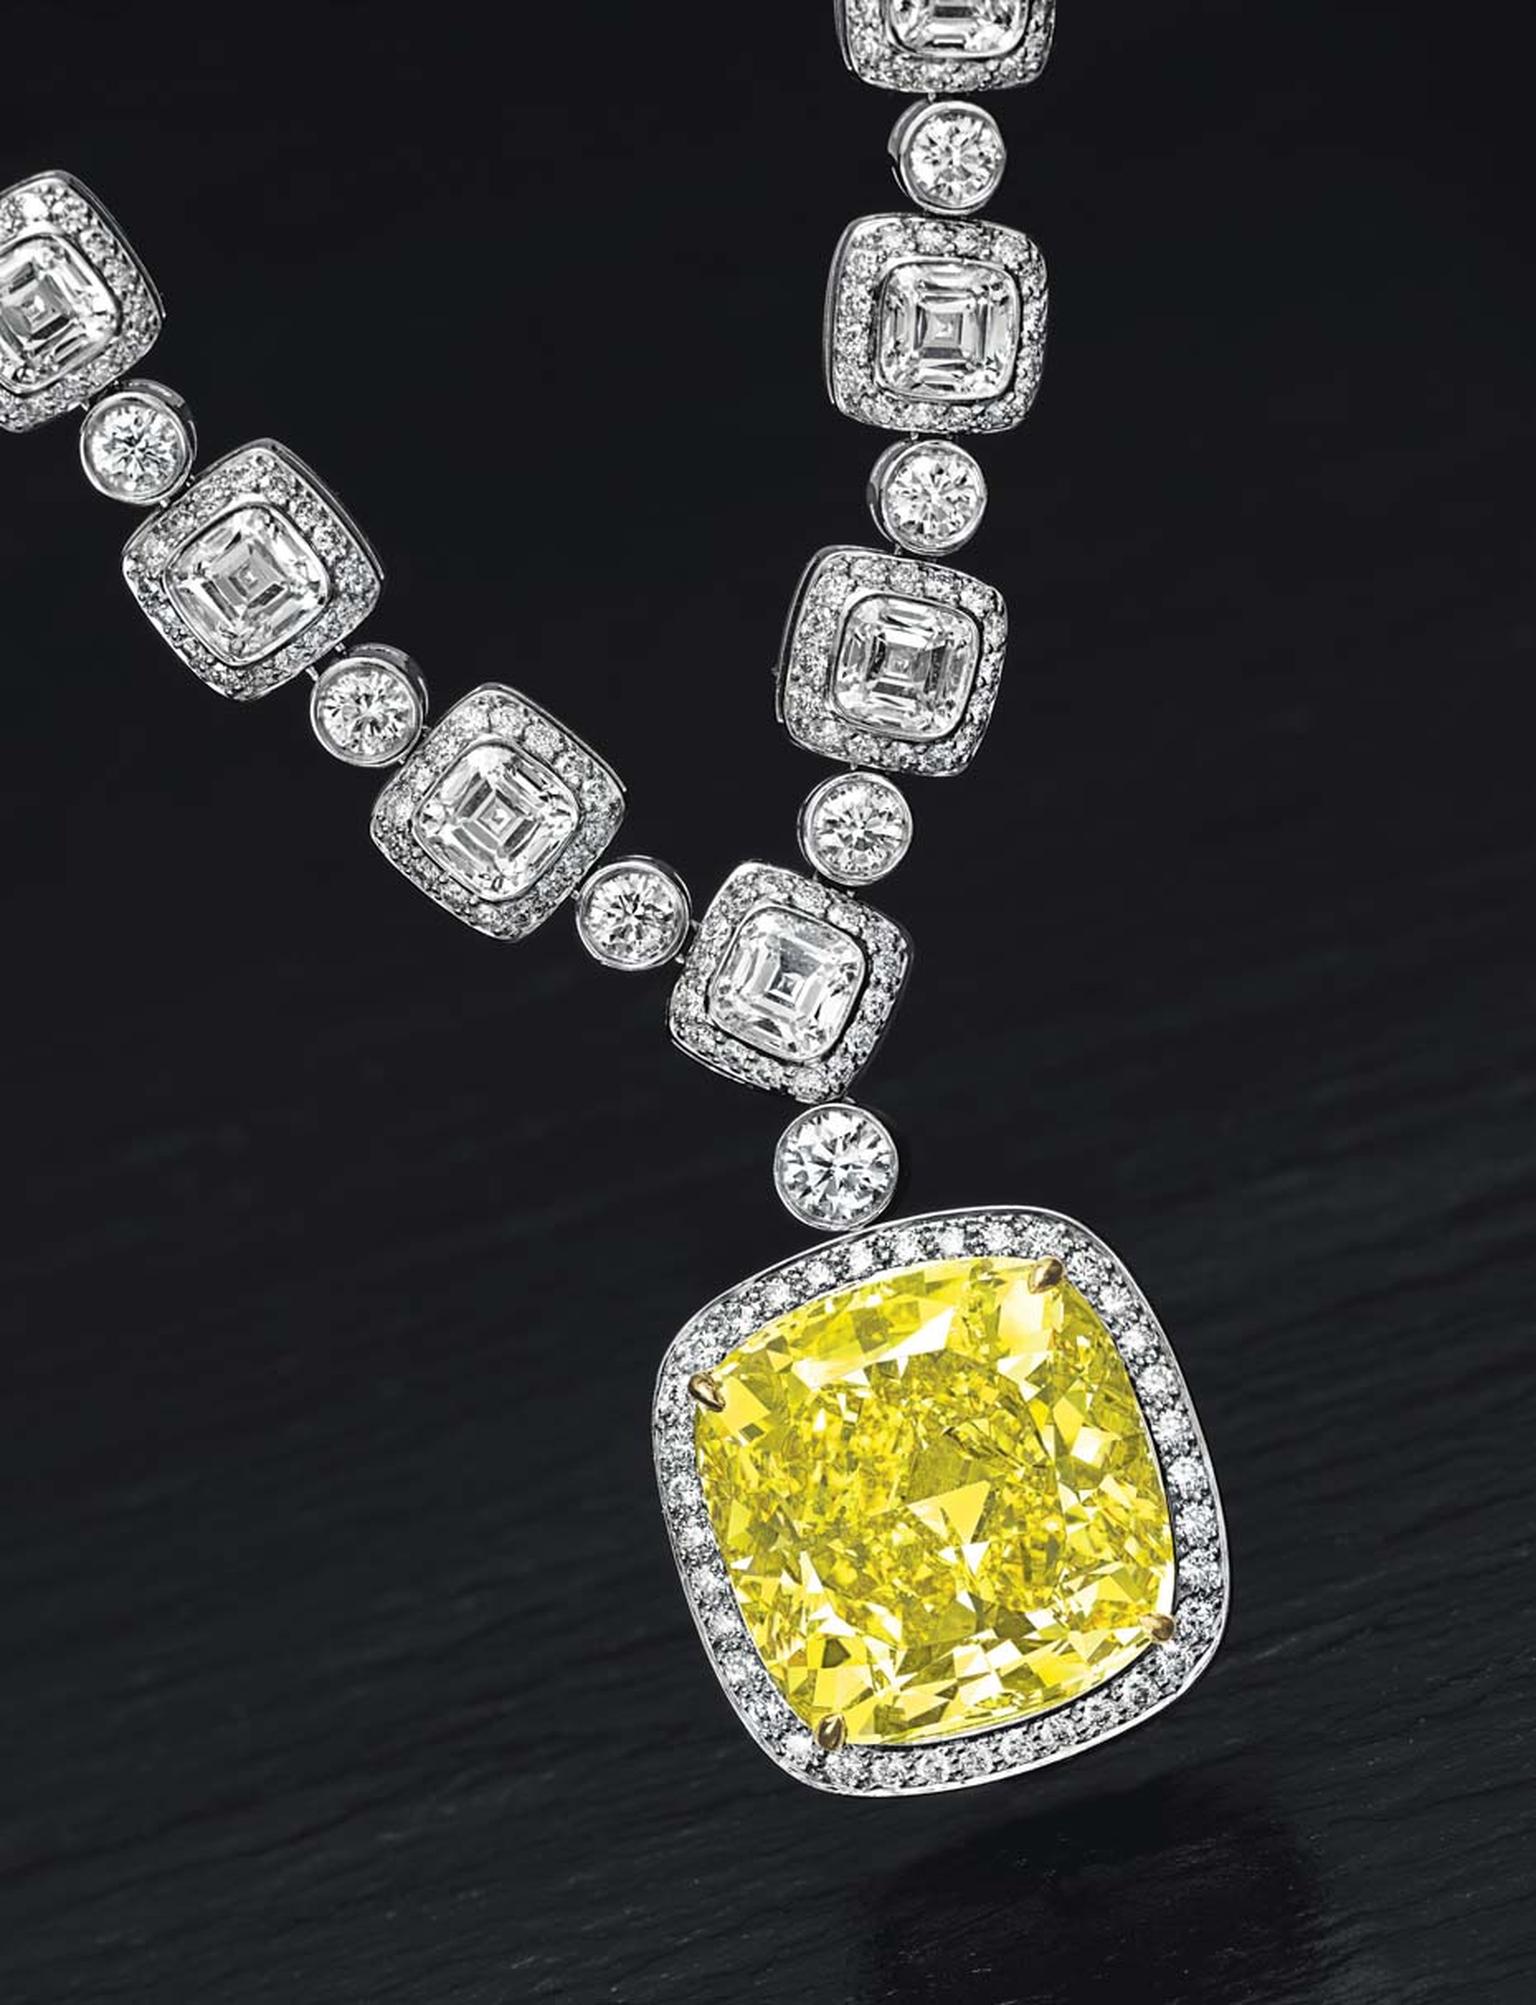 Lot 211, an important coloured diamond and diamond pendant necklace by Tiffany & Co in platinum and gold, set with a modified cushion-cut fancy vivid yellow diamond weighing approximately 20.34ct (estimate: US$1-1.5 million)